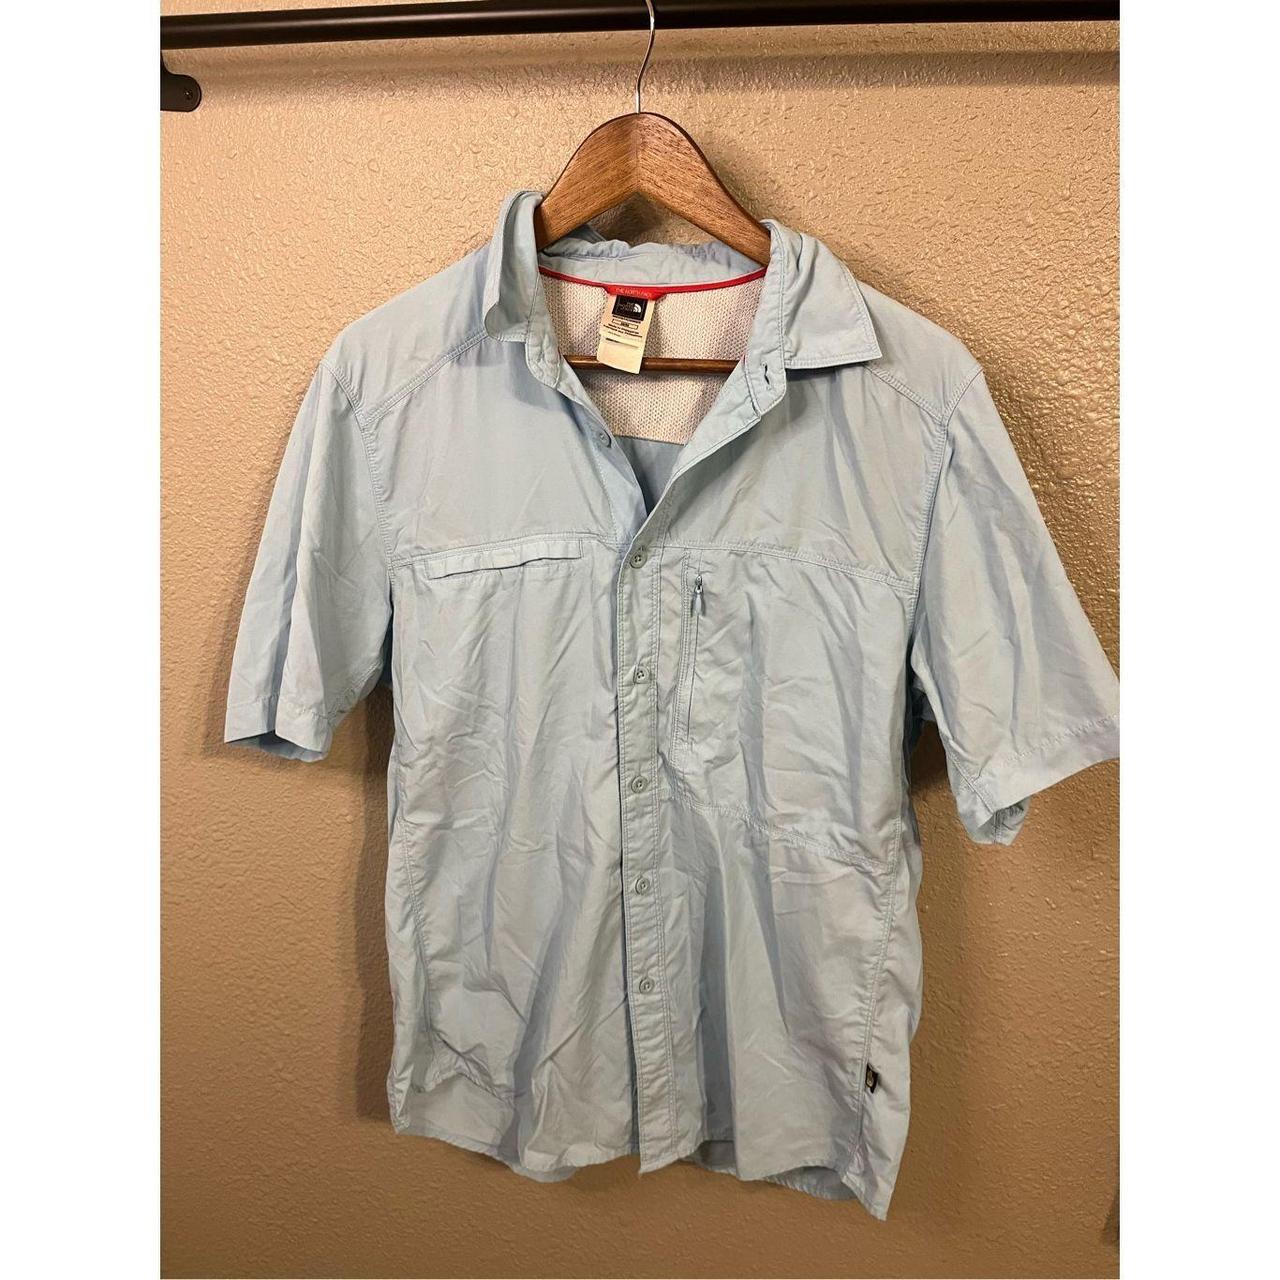 The NORTH FACE Men's Short Sleeve Button Up Vented - Depop